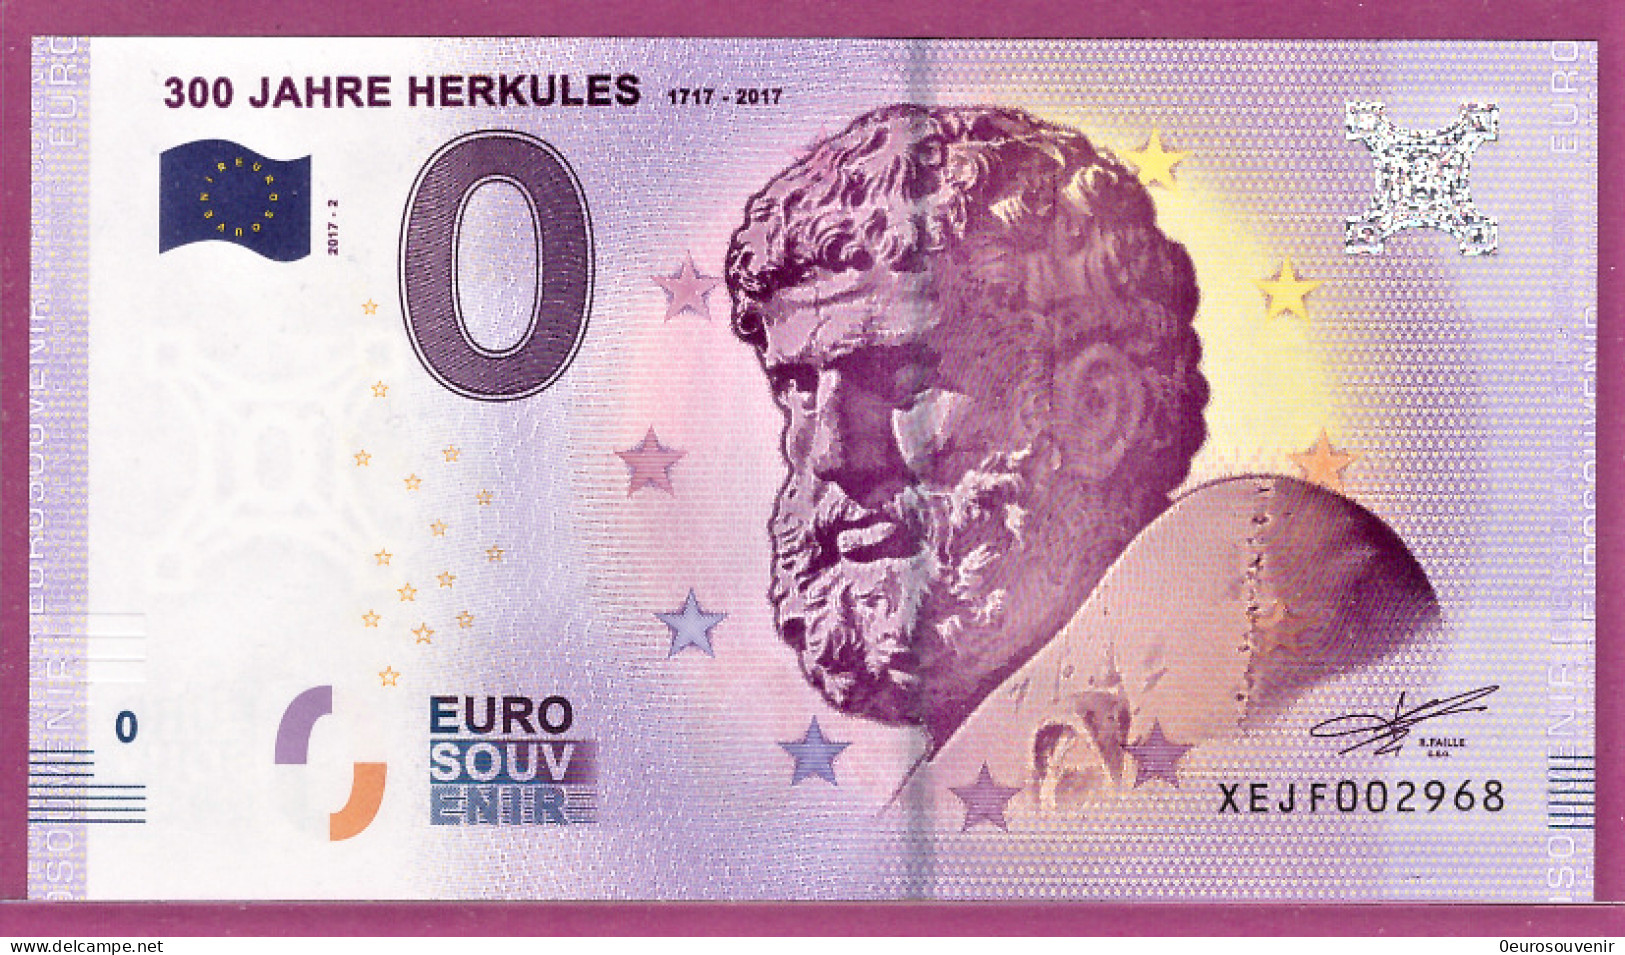 0-Euro XEJF 2017-2 300 JAHRE HERKULES 1717 - 2017 - SCHLOSSPARK KASSEL S-2b Kupfer - Private Proofs / Unofficial